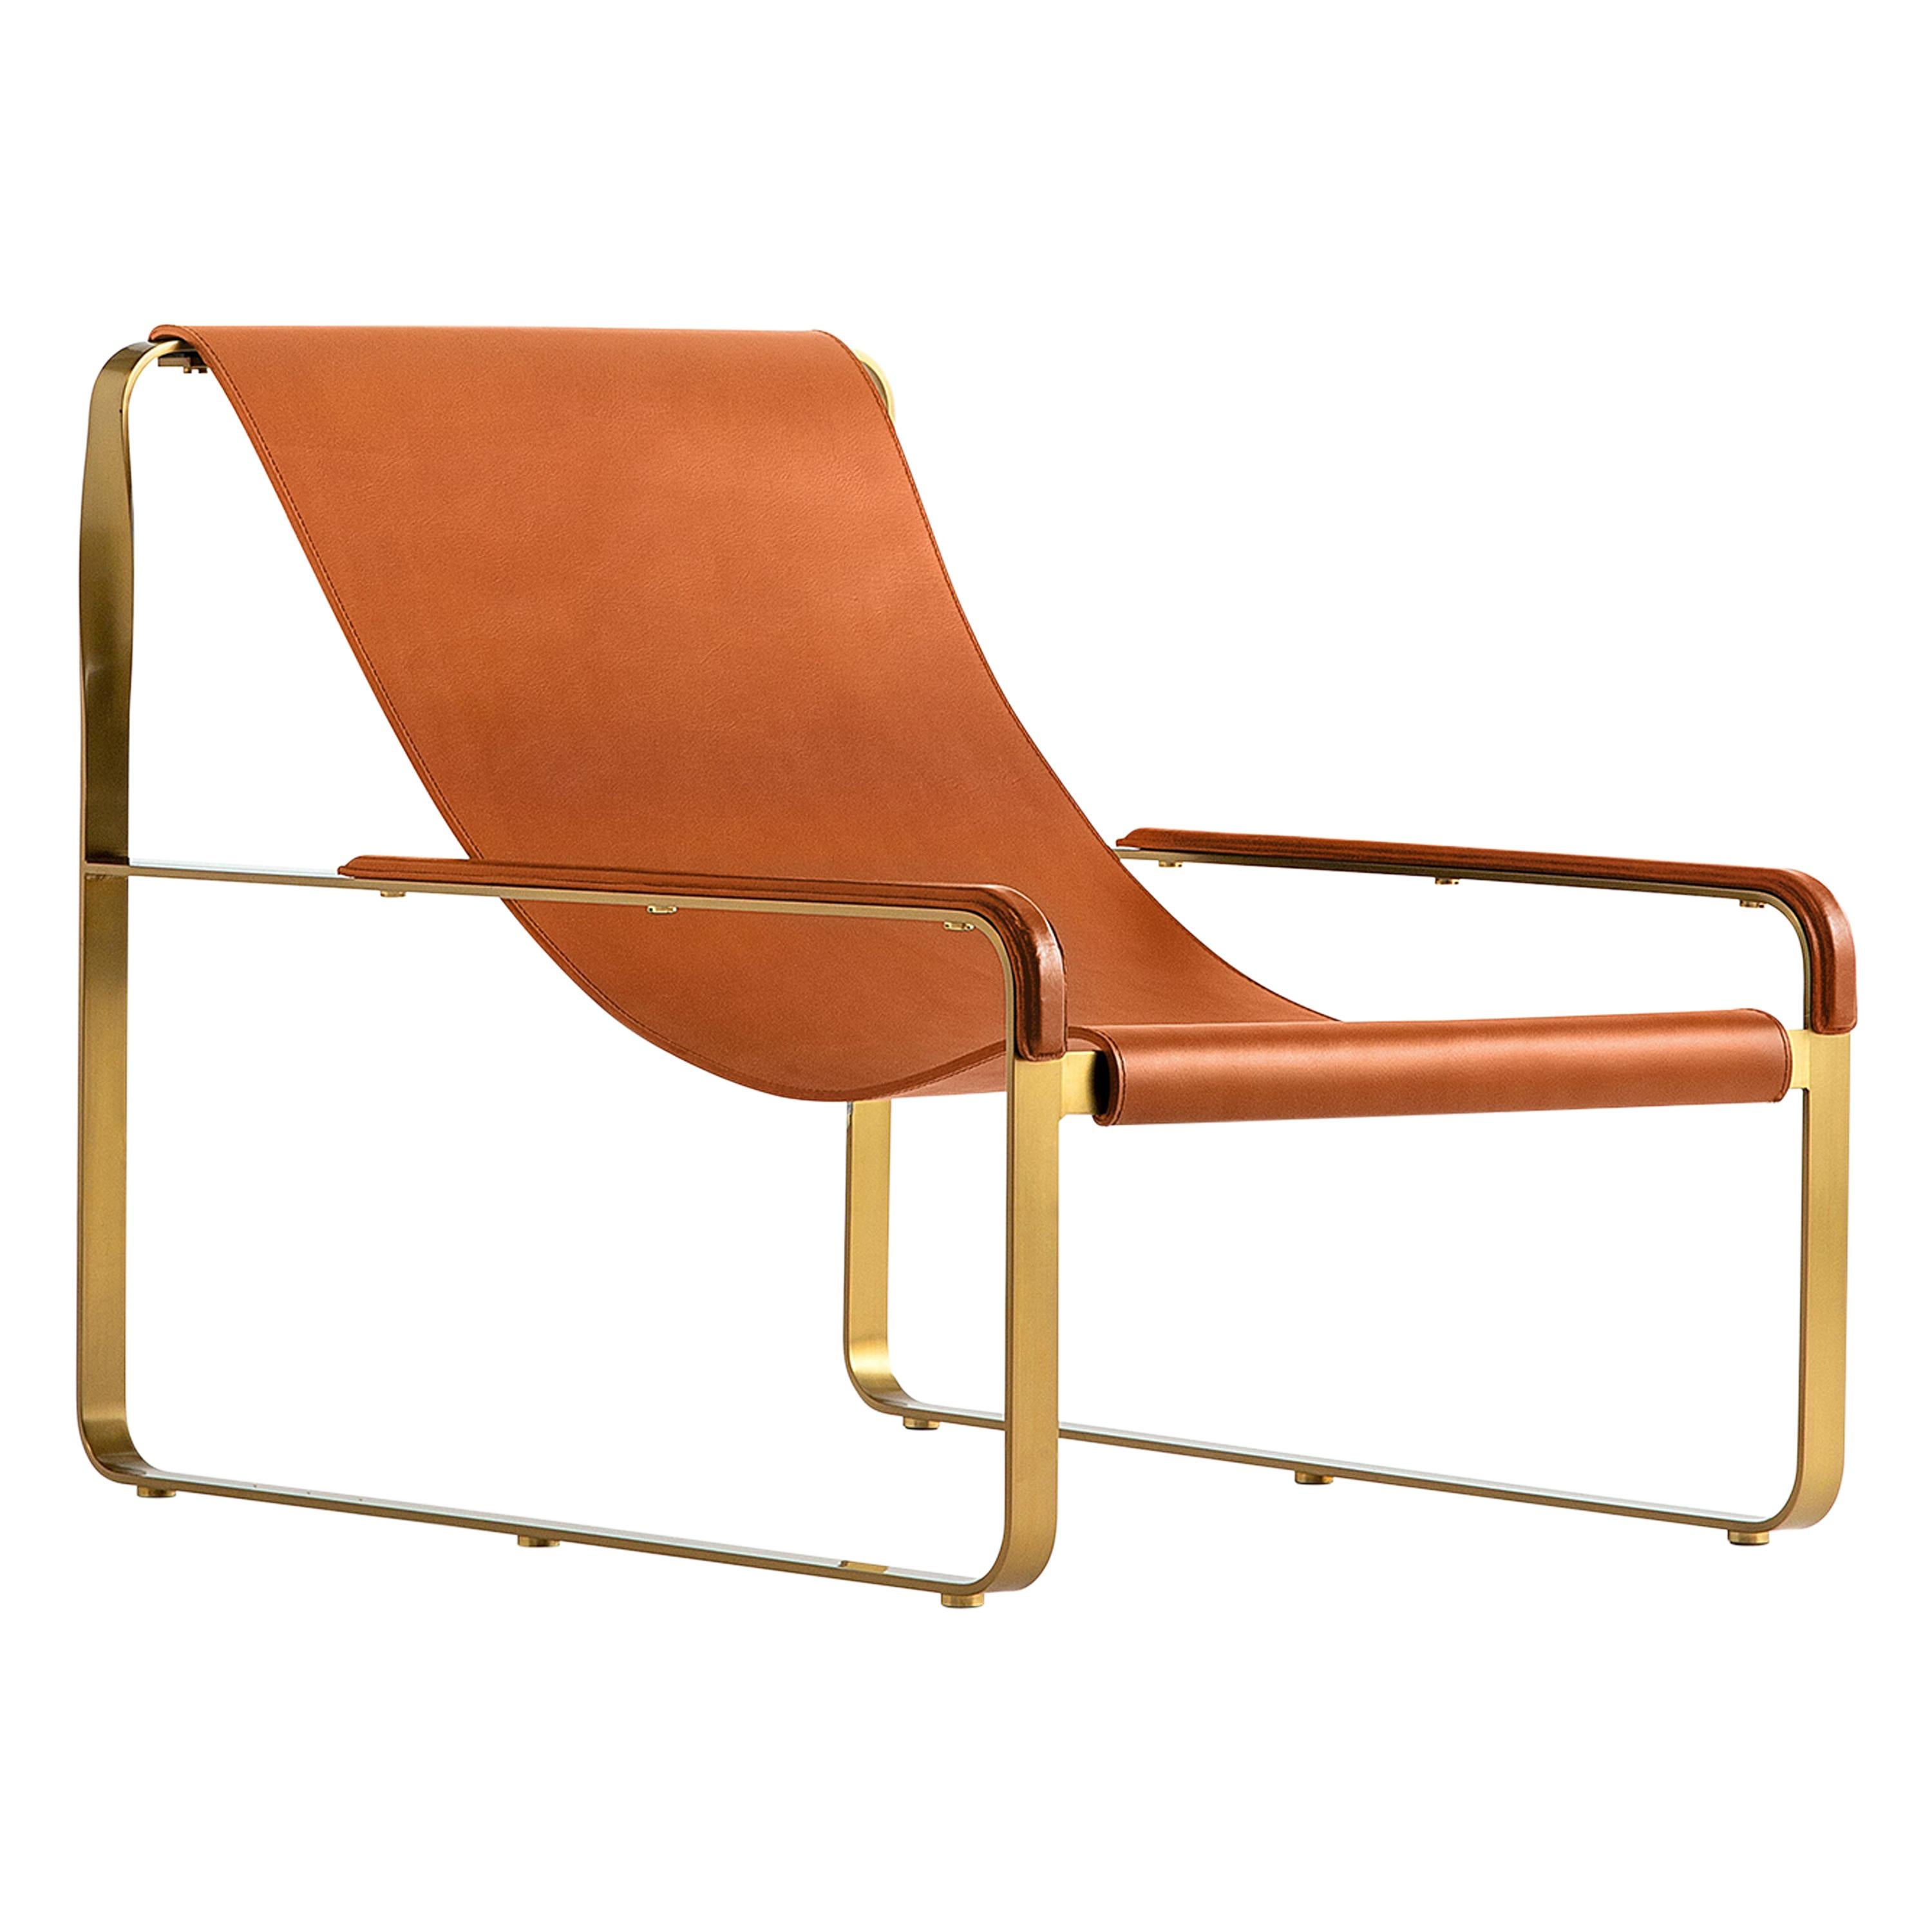 Timeless Contemporary Chaise Lounge Aged Brass Steel & Natural Tobacco Leather